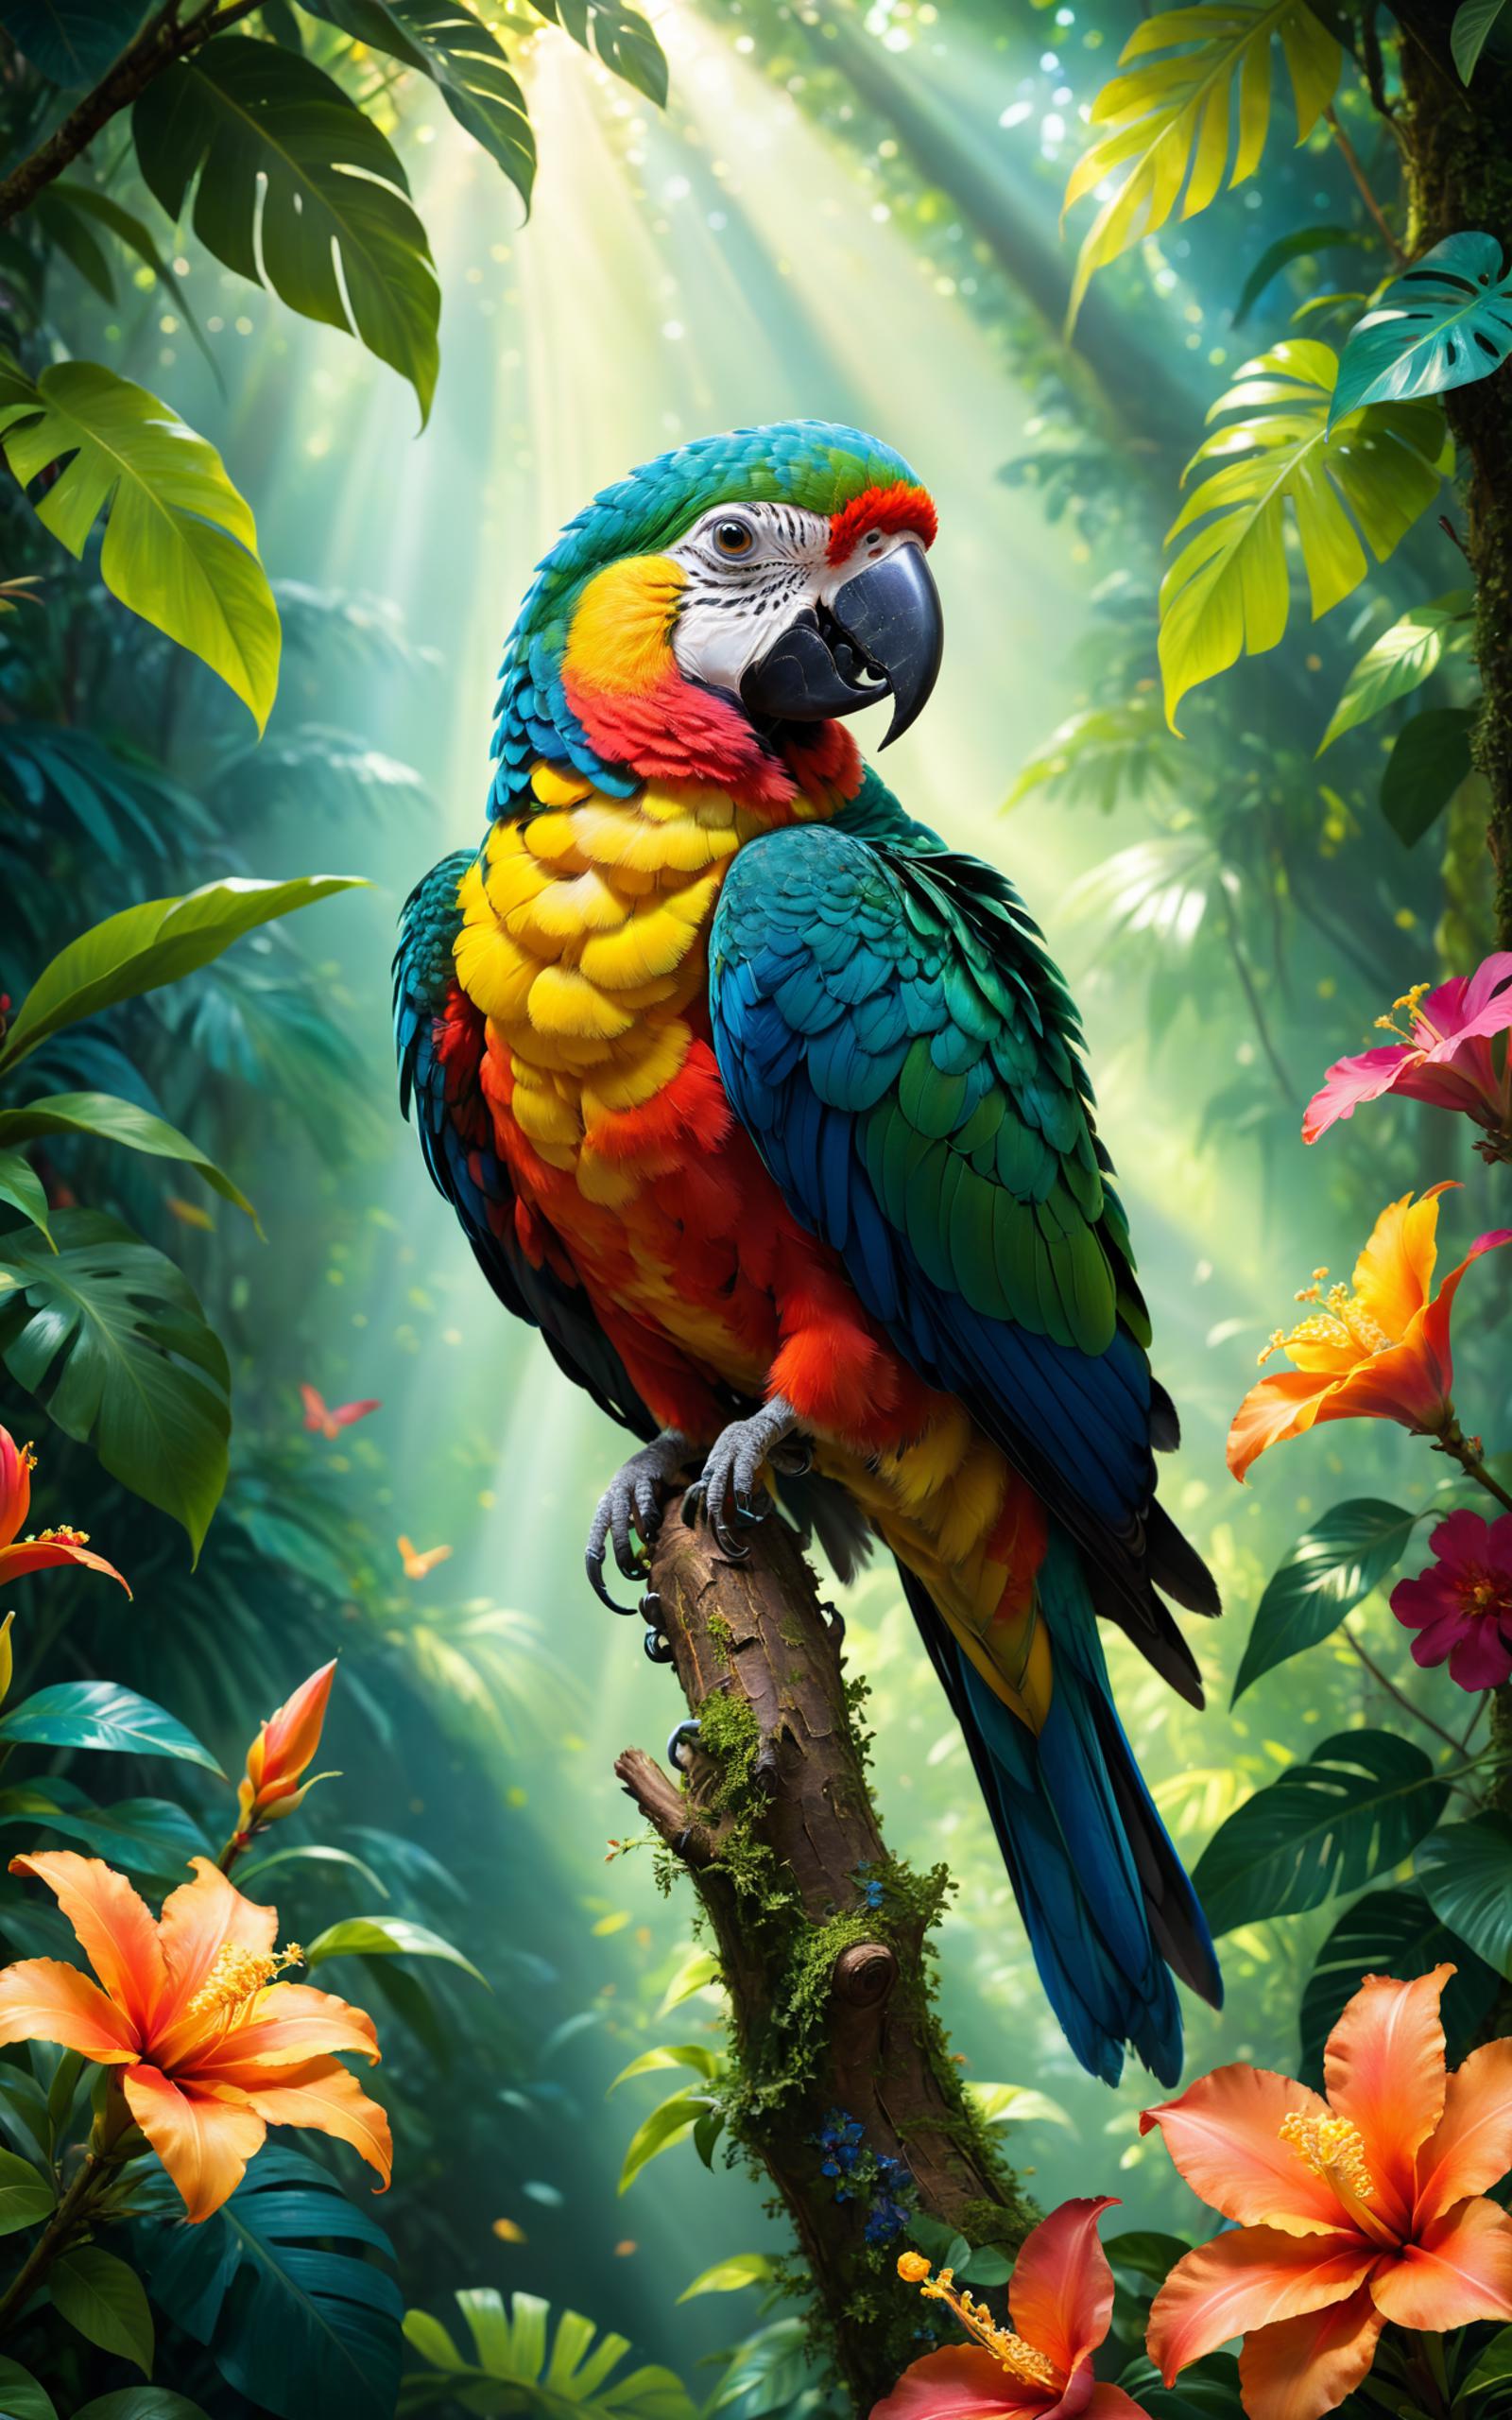 A vibrant colorful parrot perched on a branch surrounded by flowers and other tropical elements.